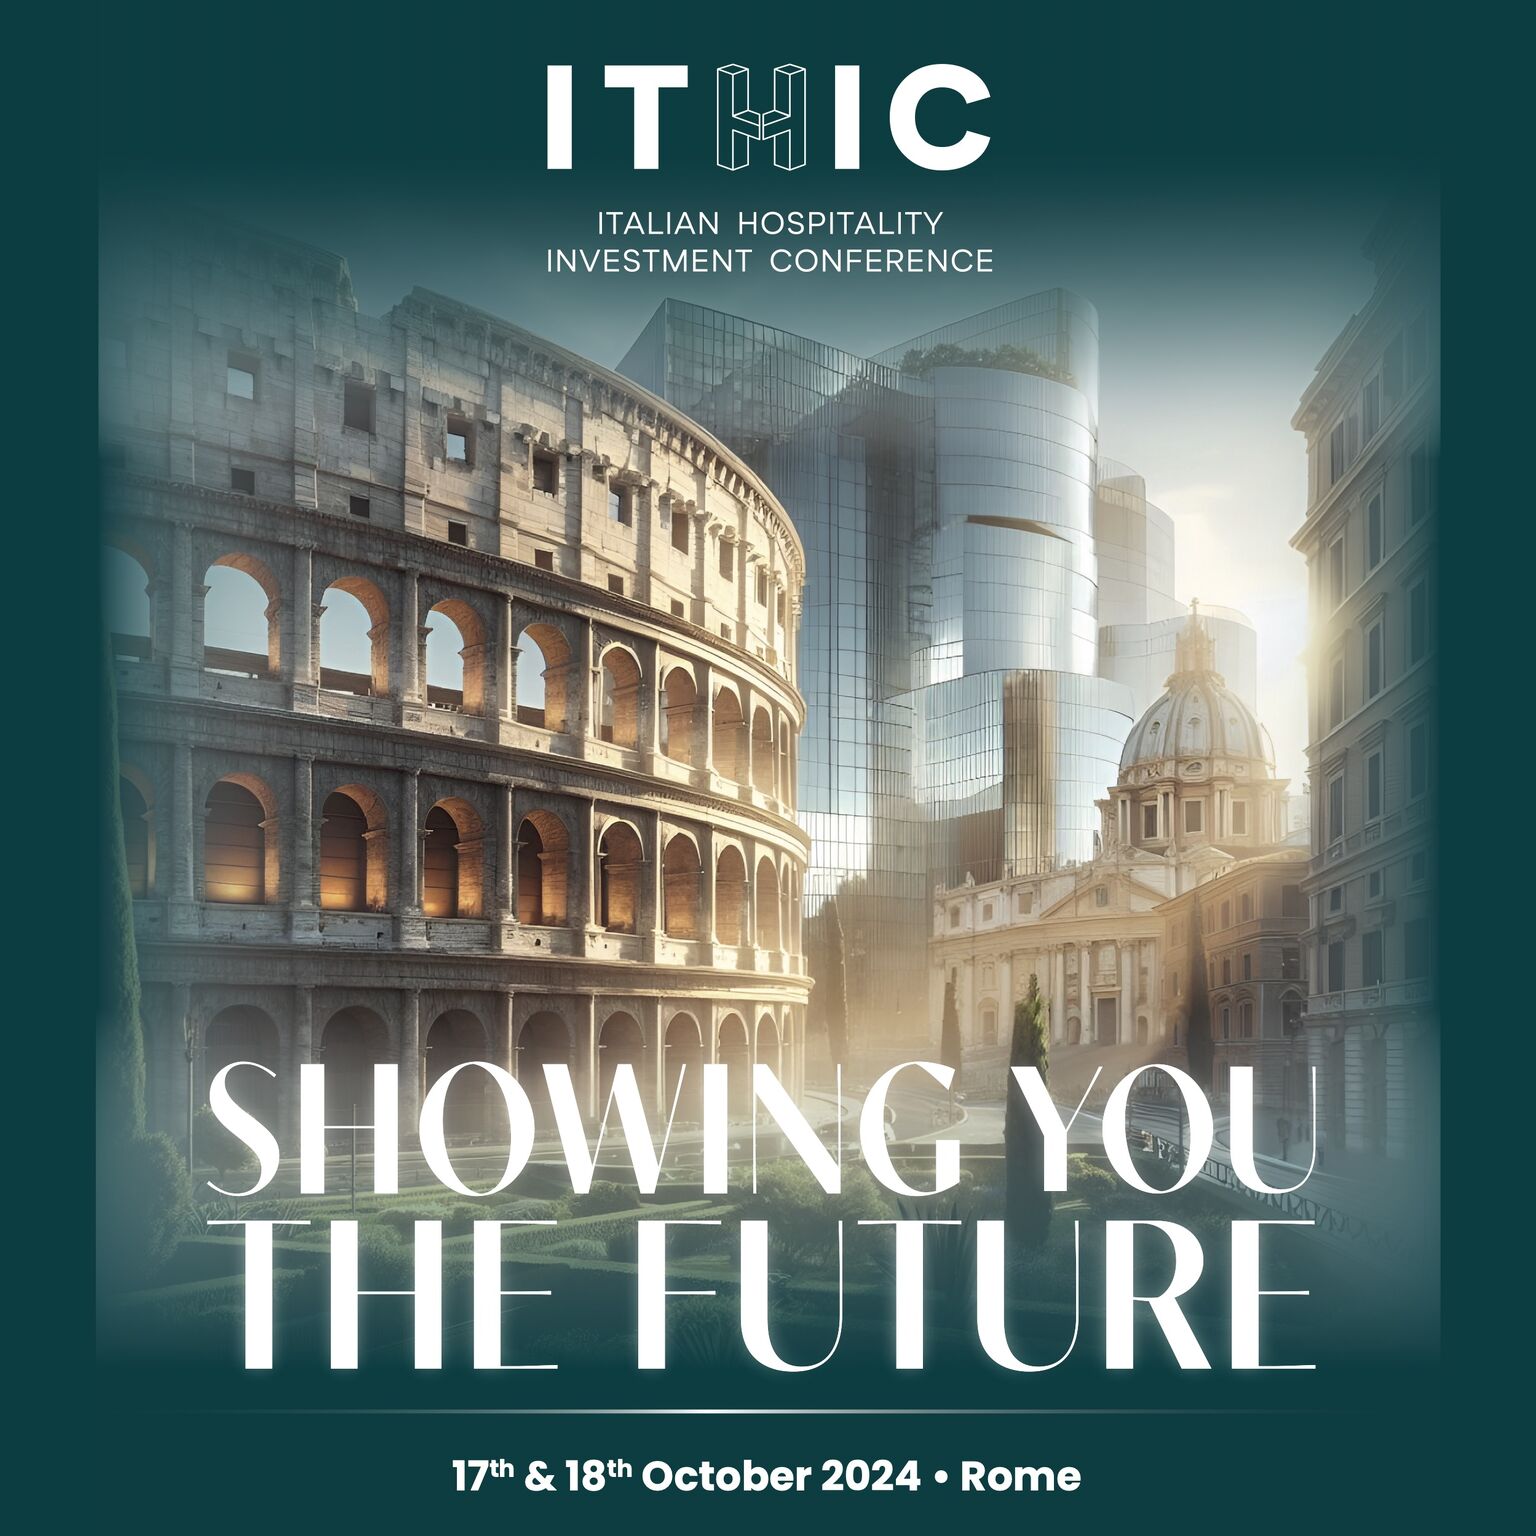 ITHIC is the first international conference exclusively dedicated to investments targeting hospitality in Italy